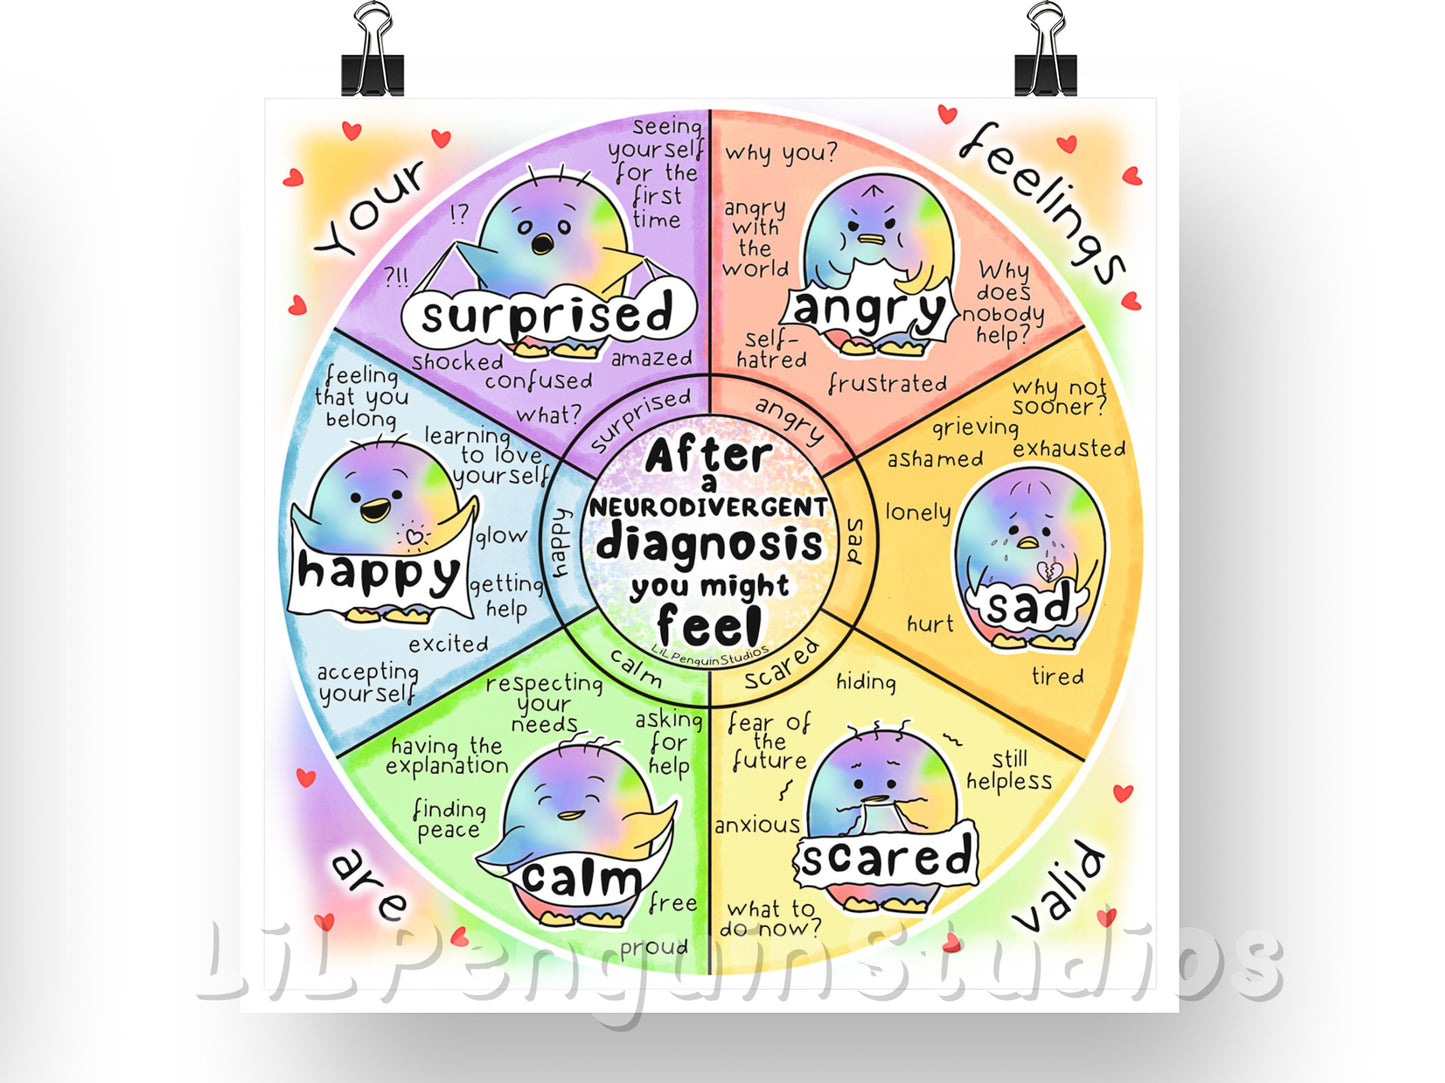 Neurodivergent Diagnosis emotions wheel poster included in the Autistic Affirmations and Reminders' Printable Poster Set.